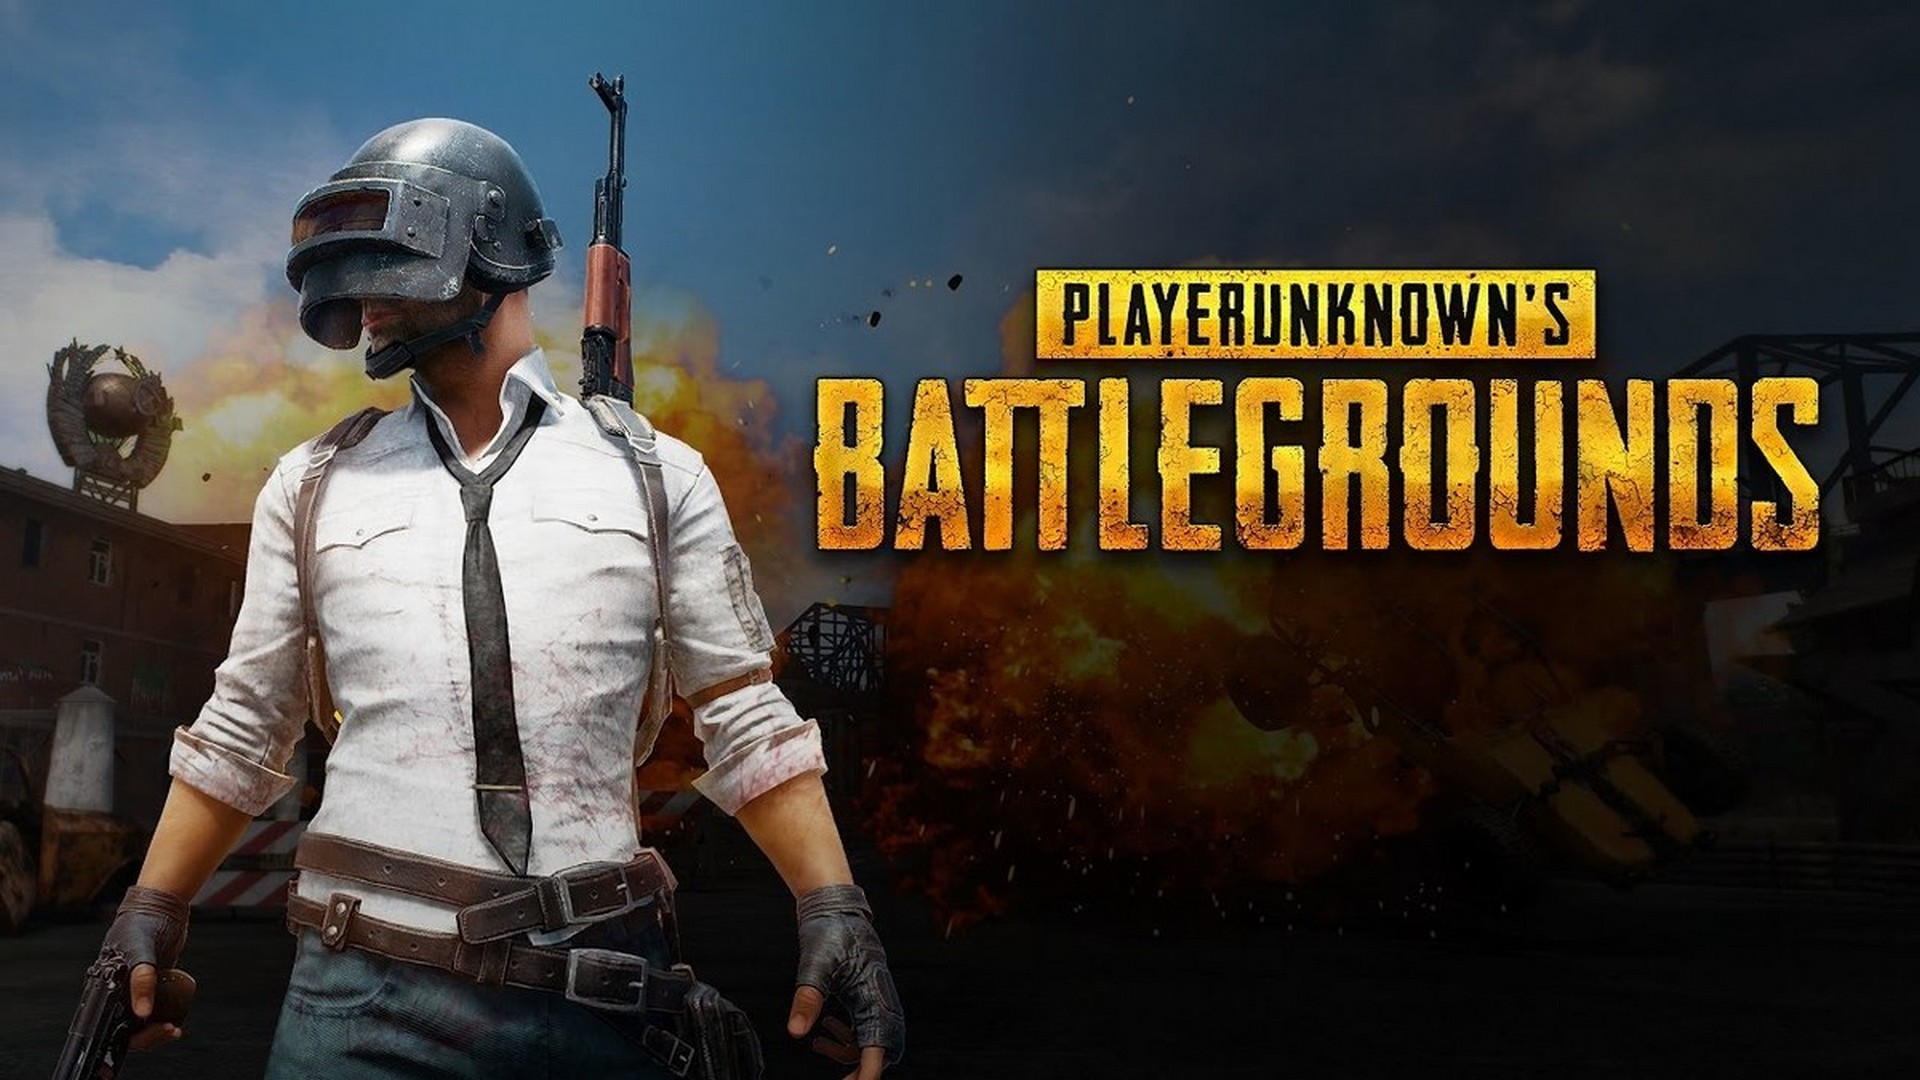 Wallpaper PUBG Update Xbox One Desktop with resolution 1920X1080 pixel. You can use this wallpaper as background for your desktop Computer Screensavers, Android or iPhone smartphones